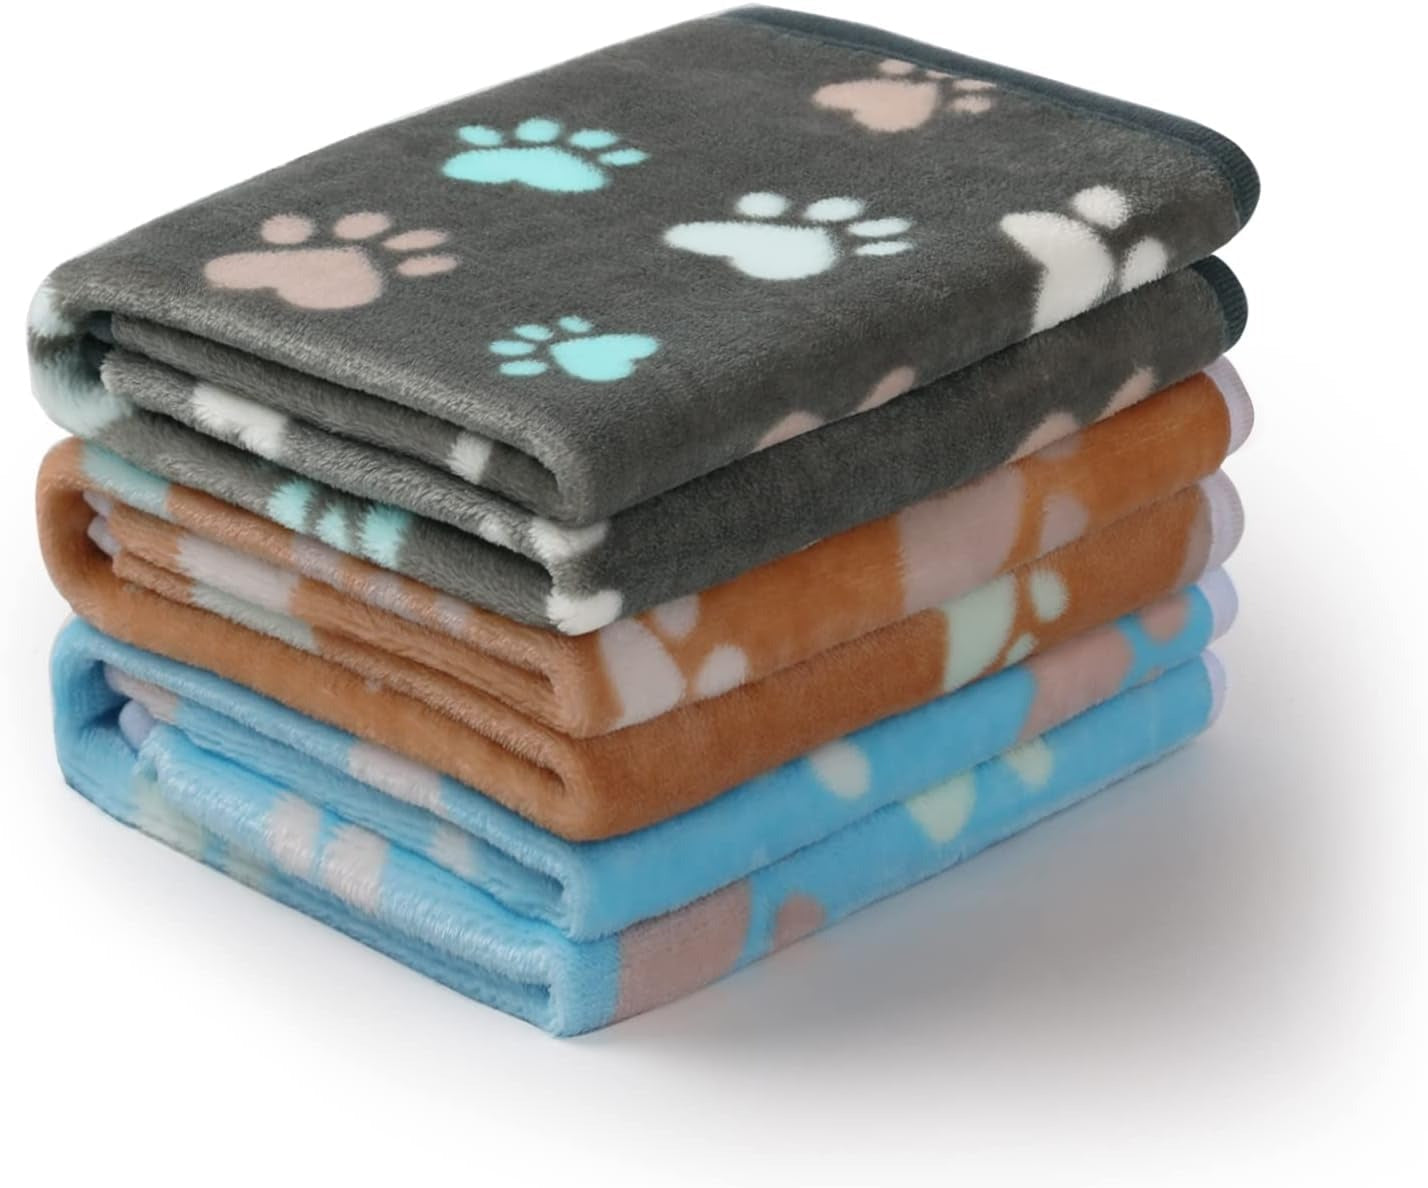 3 Super Soft Fluffy Fleece Blankets with Paw print-DogsTailCircle